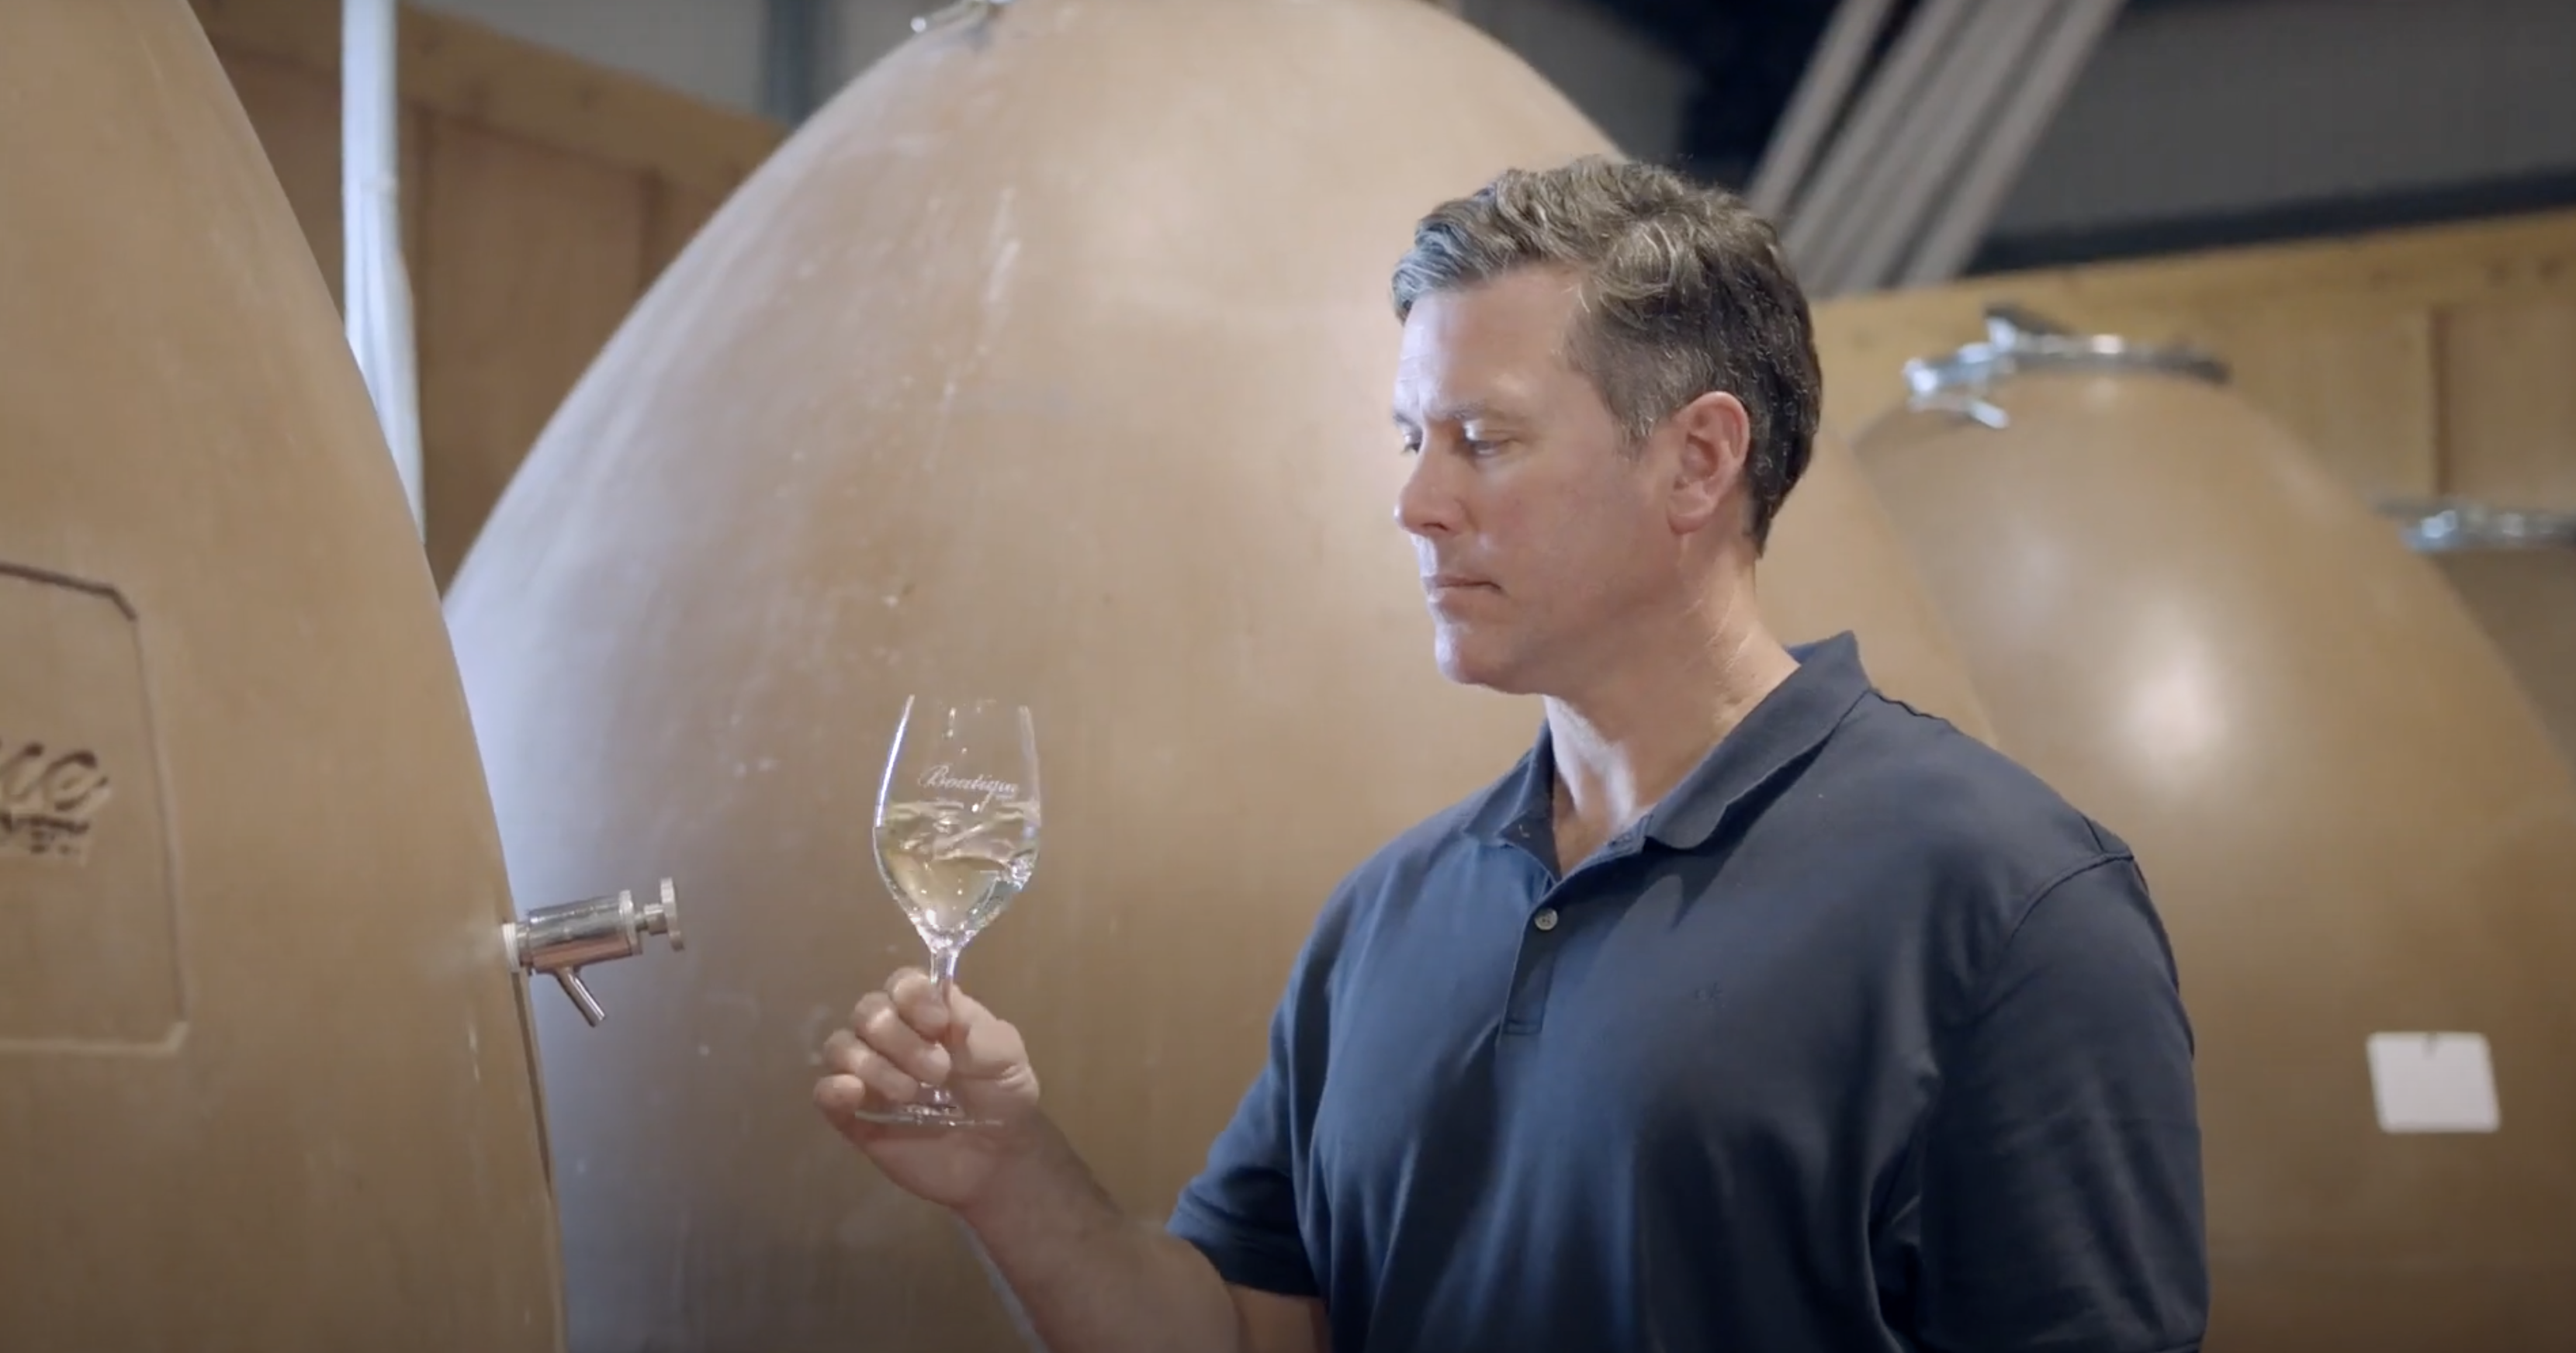 Winemaker tasting a white wine in front of concrete eggs